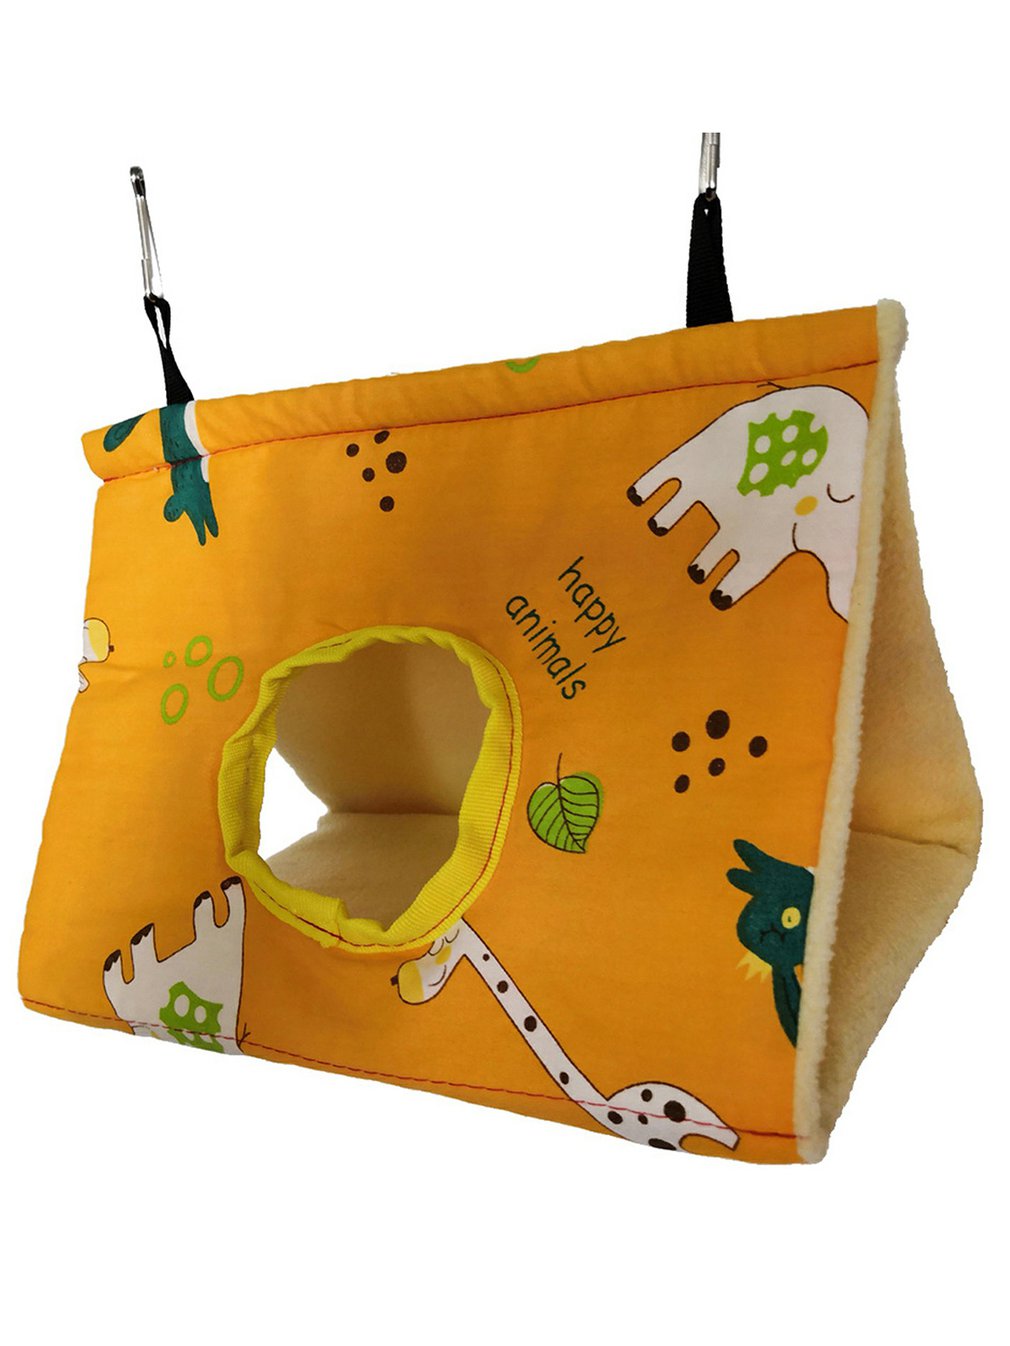 Hanging Yellow Small Pet Cave/House